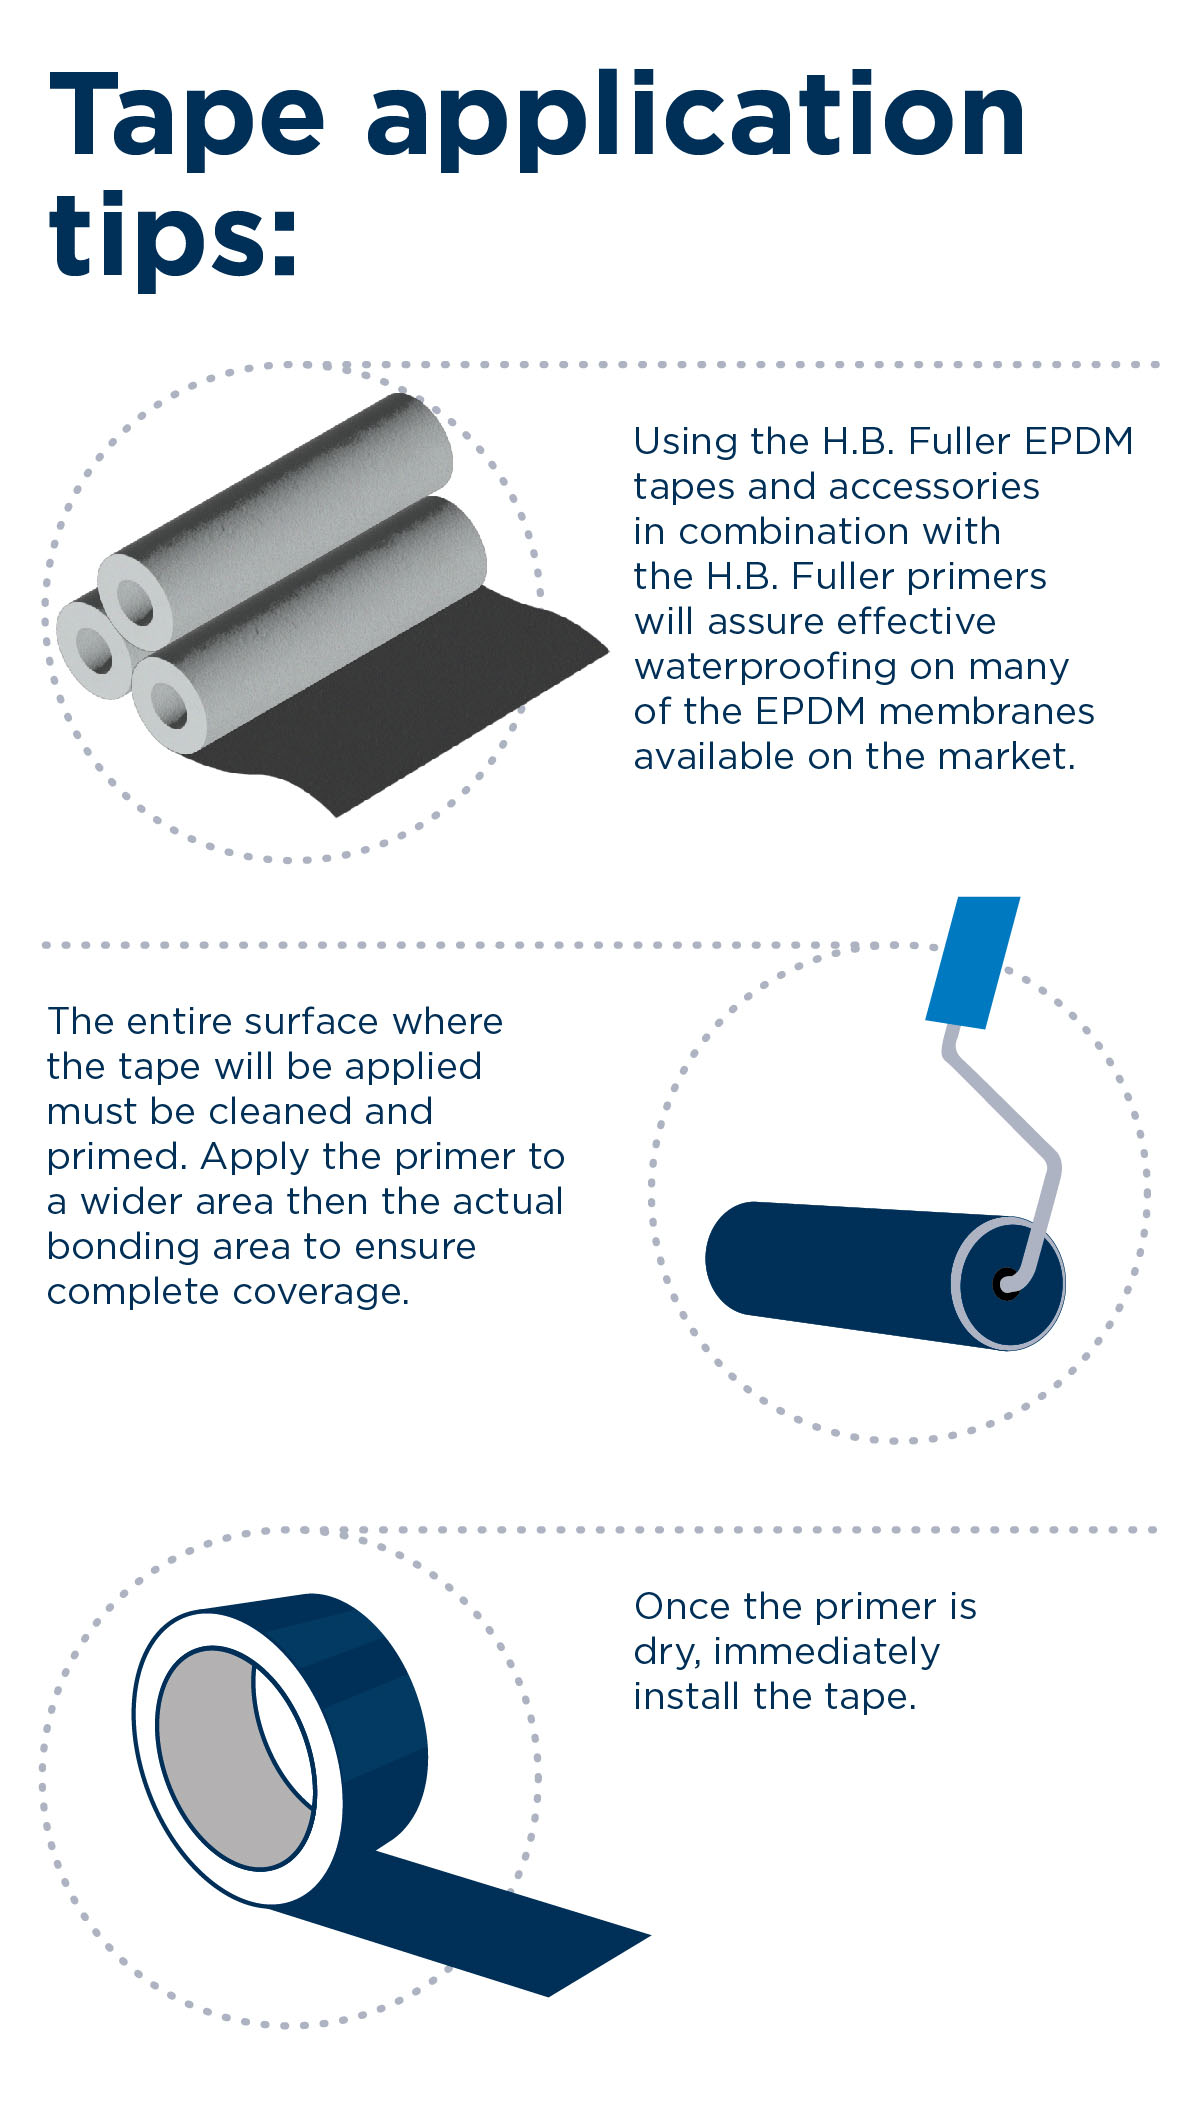 Tape Application Tips - Infographic